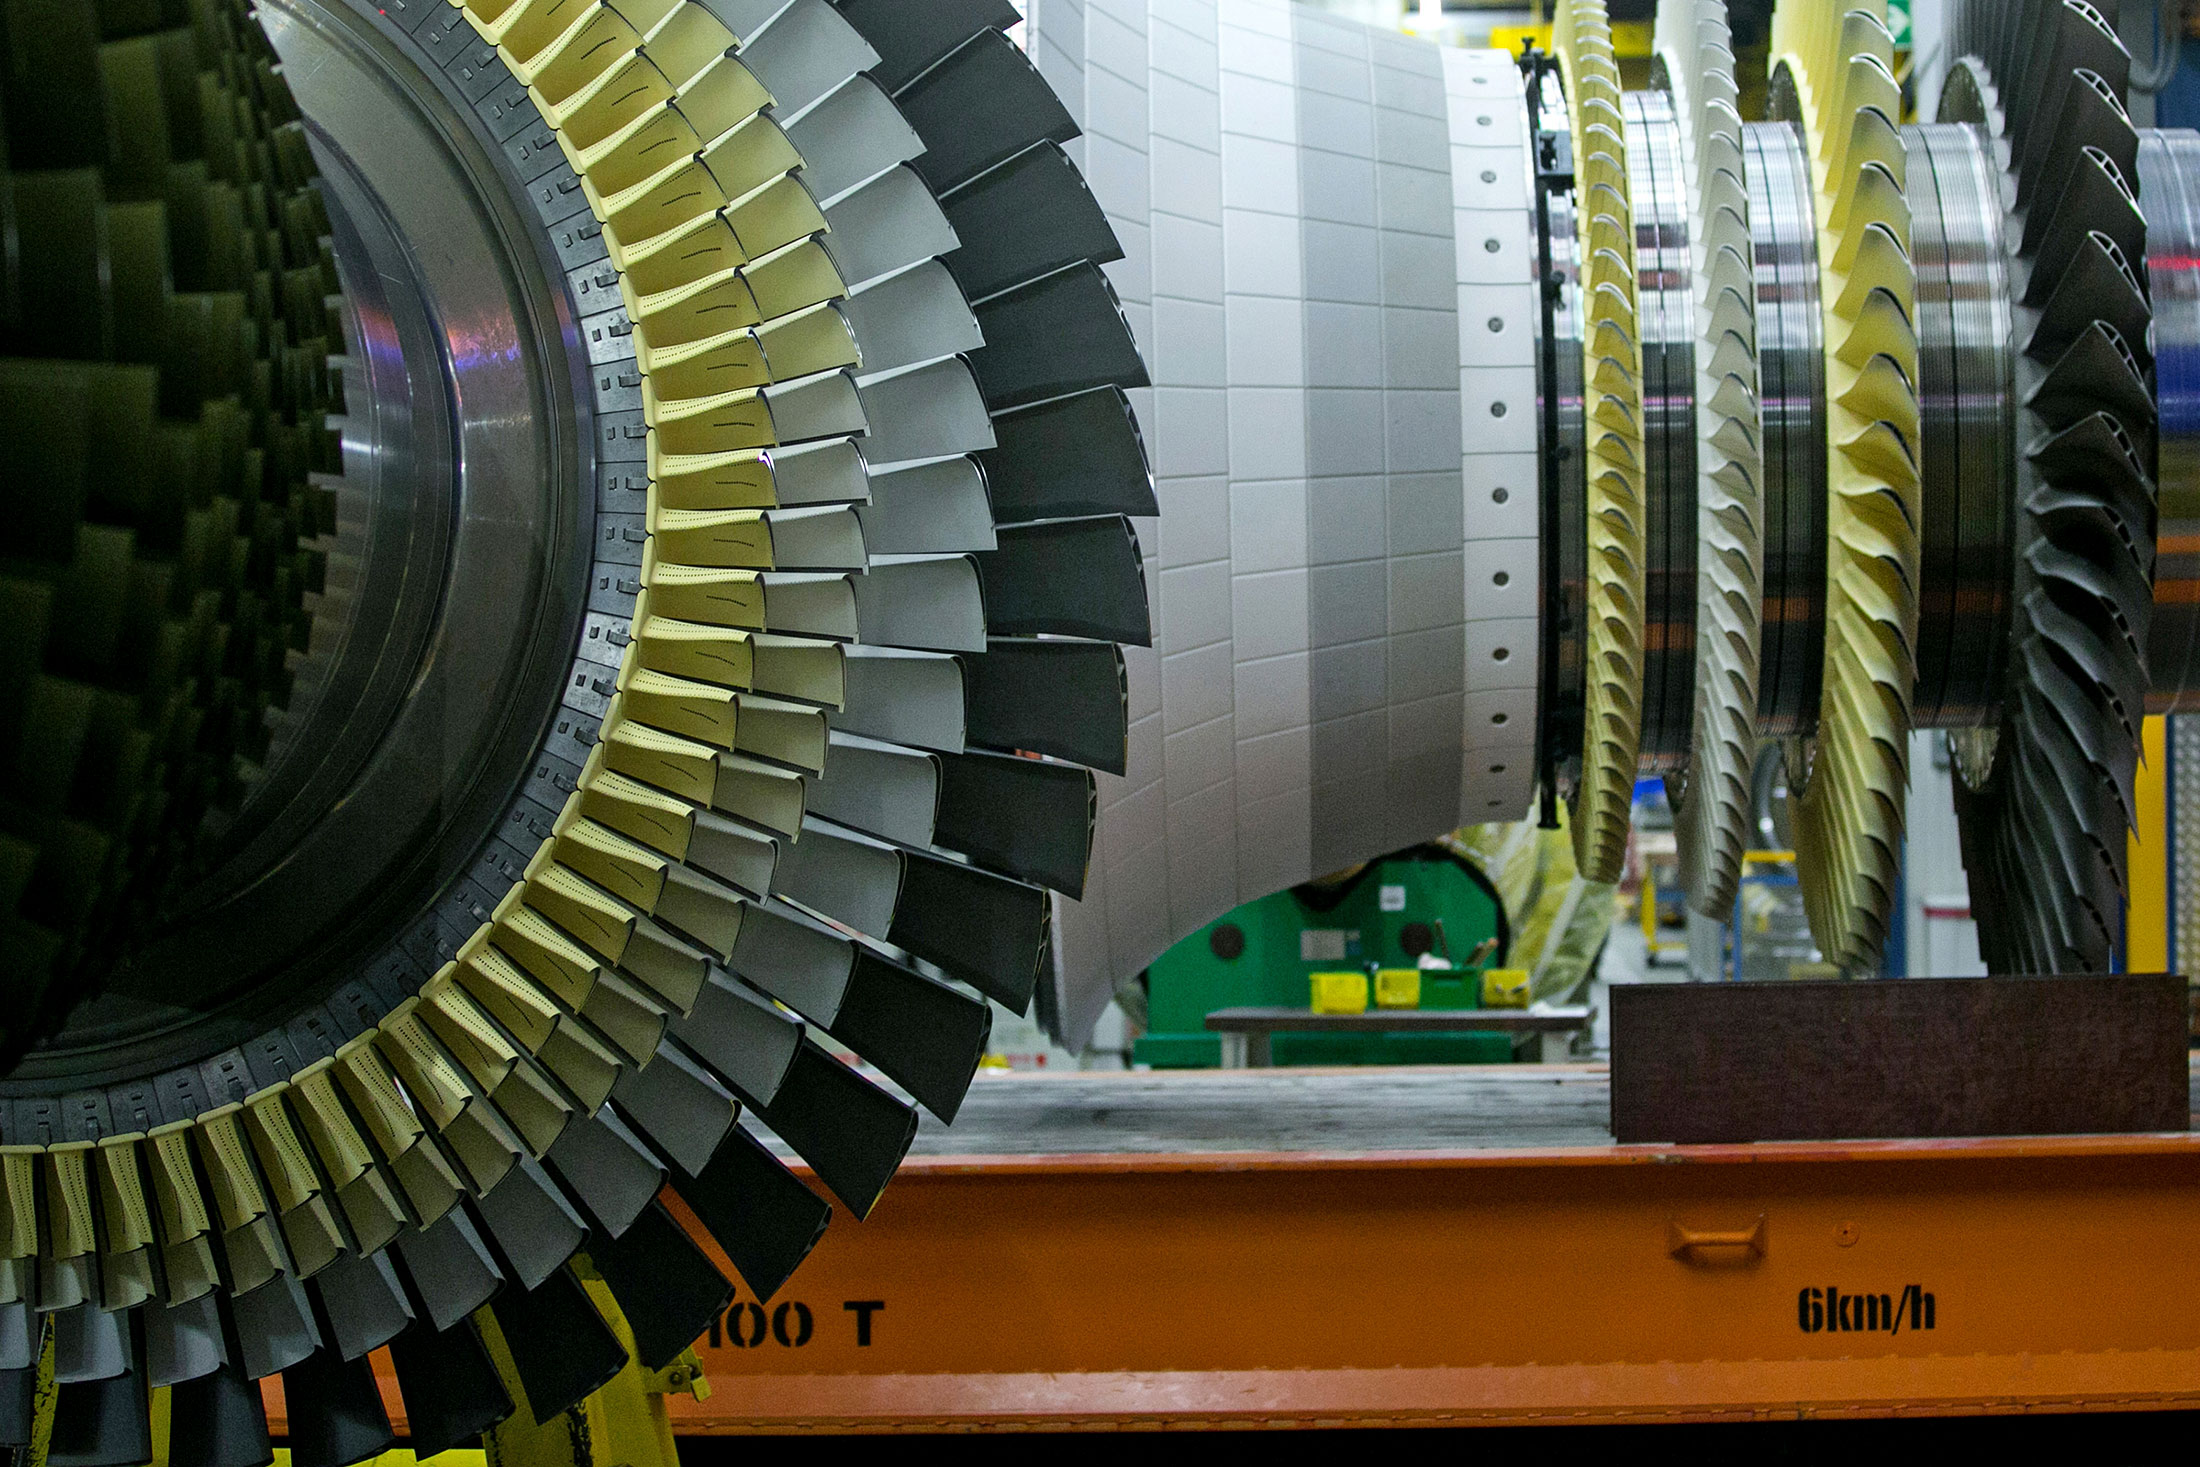 Blades sit on F-class turbines on the assembly line of Siemens AG's gas turbine factory in Berlin, Germany, on Tuesday, Feb. 2, 2016. Siemens, Europe's largest engineering company, criticized the U.K. government for creating uncertainty in the energy industry, saying it hampers investment in gas plants, wind farms and factories.
